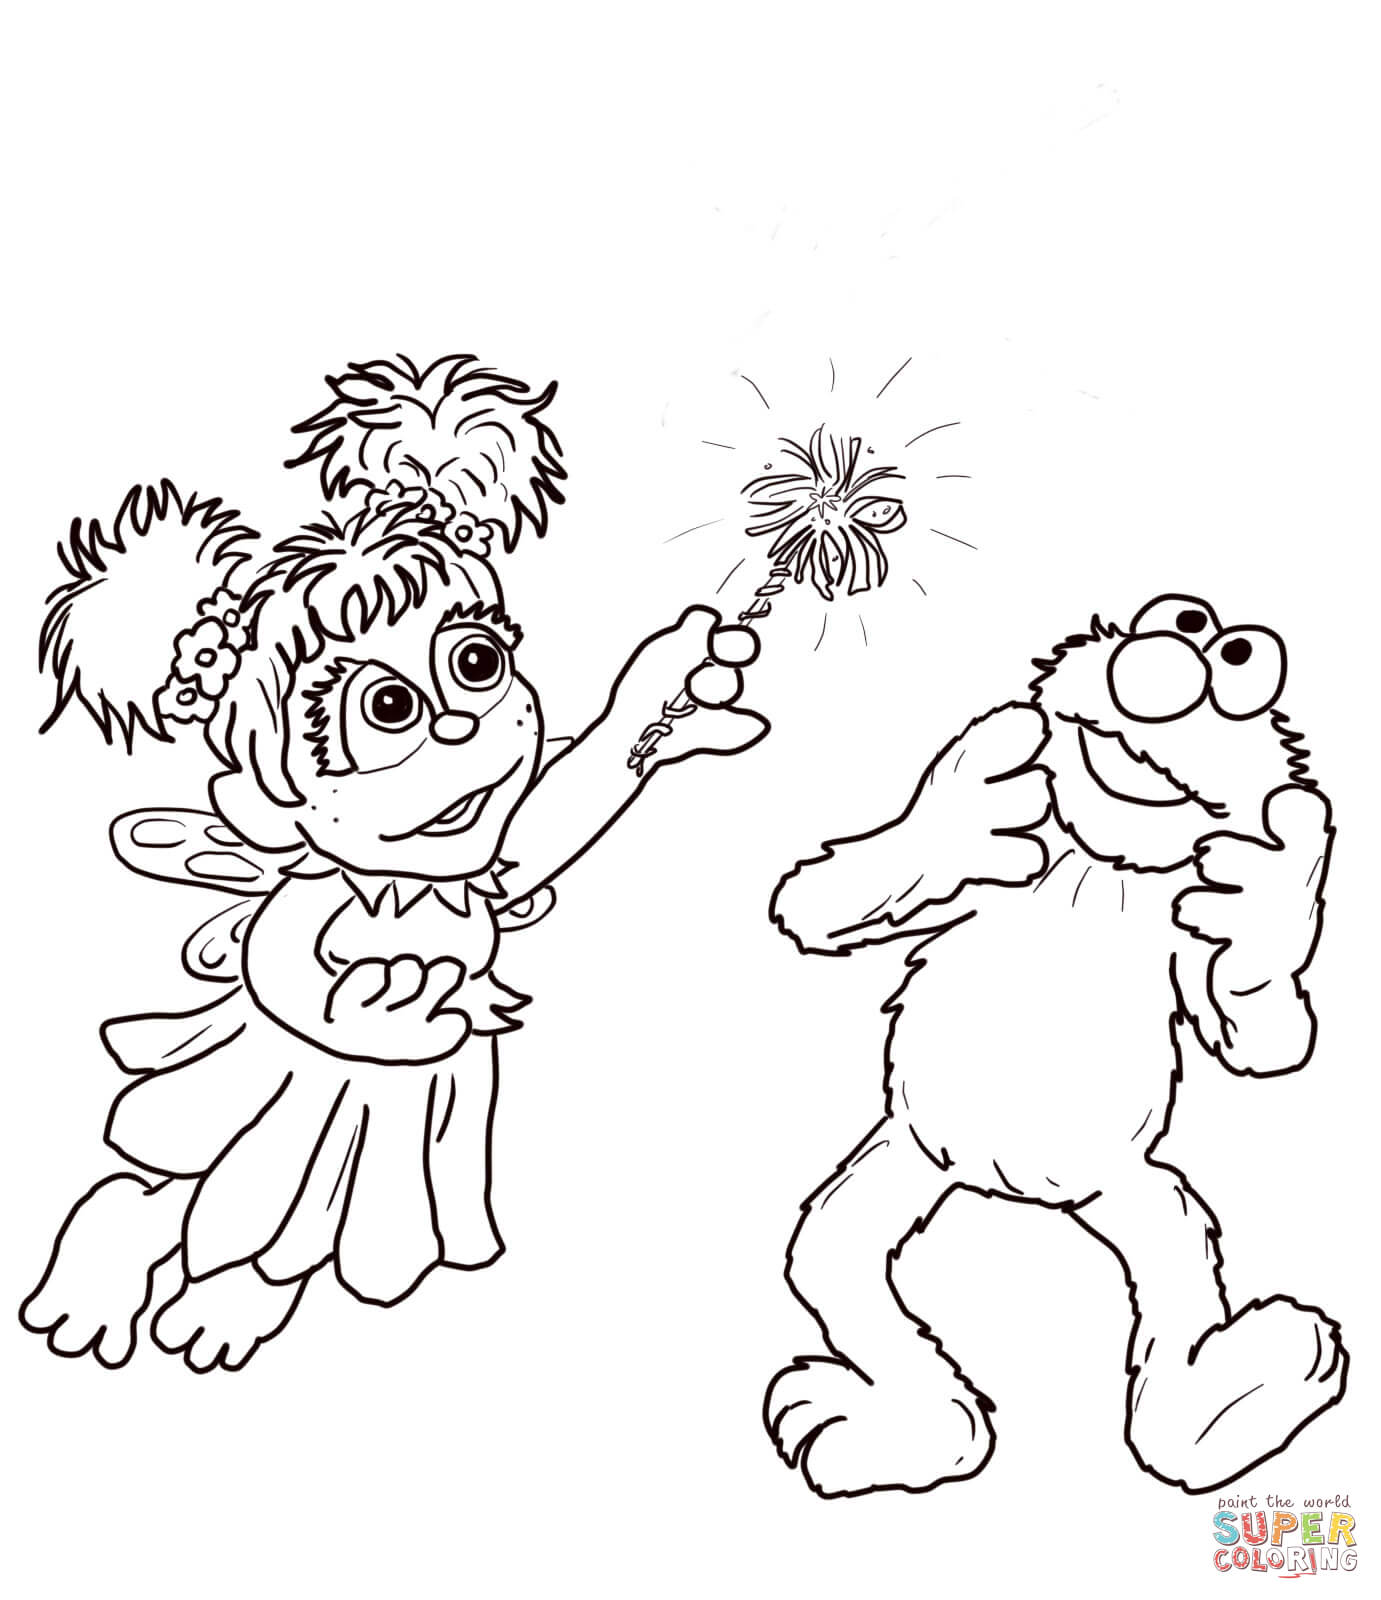 Abby Cadabby and Elmo coloring page | Free Printable Coloring Pages